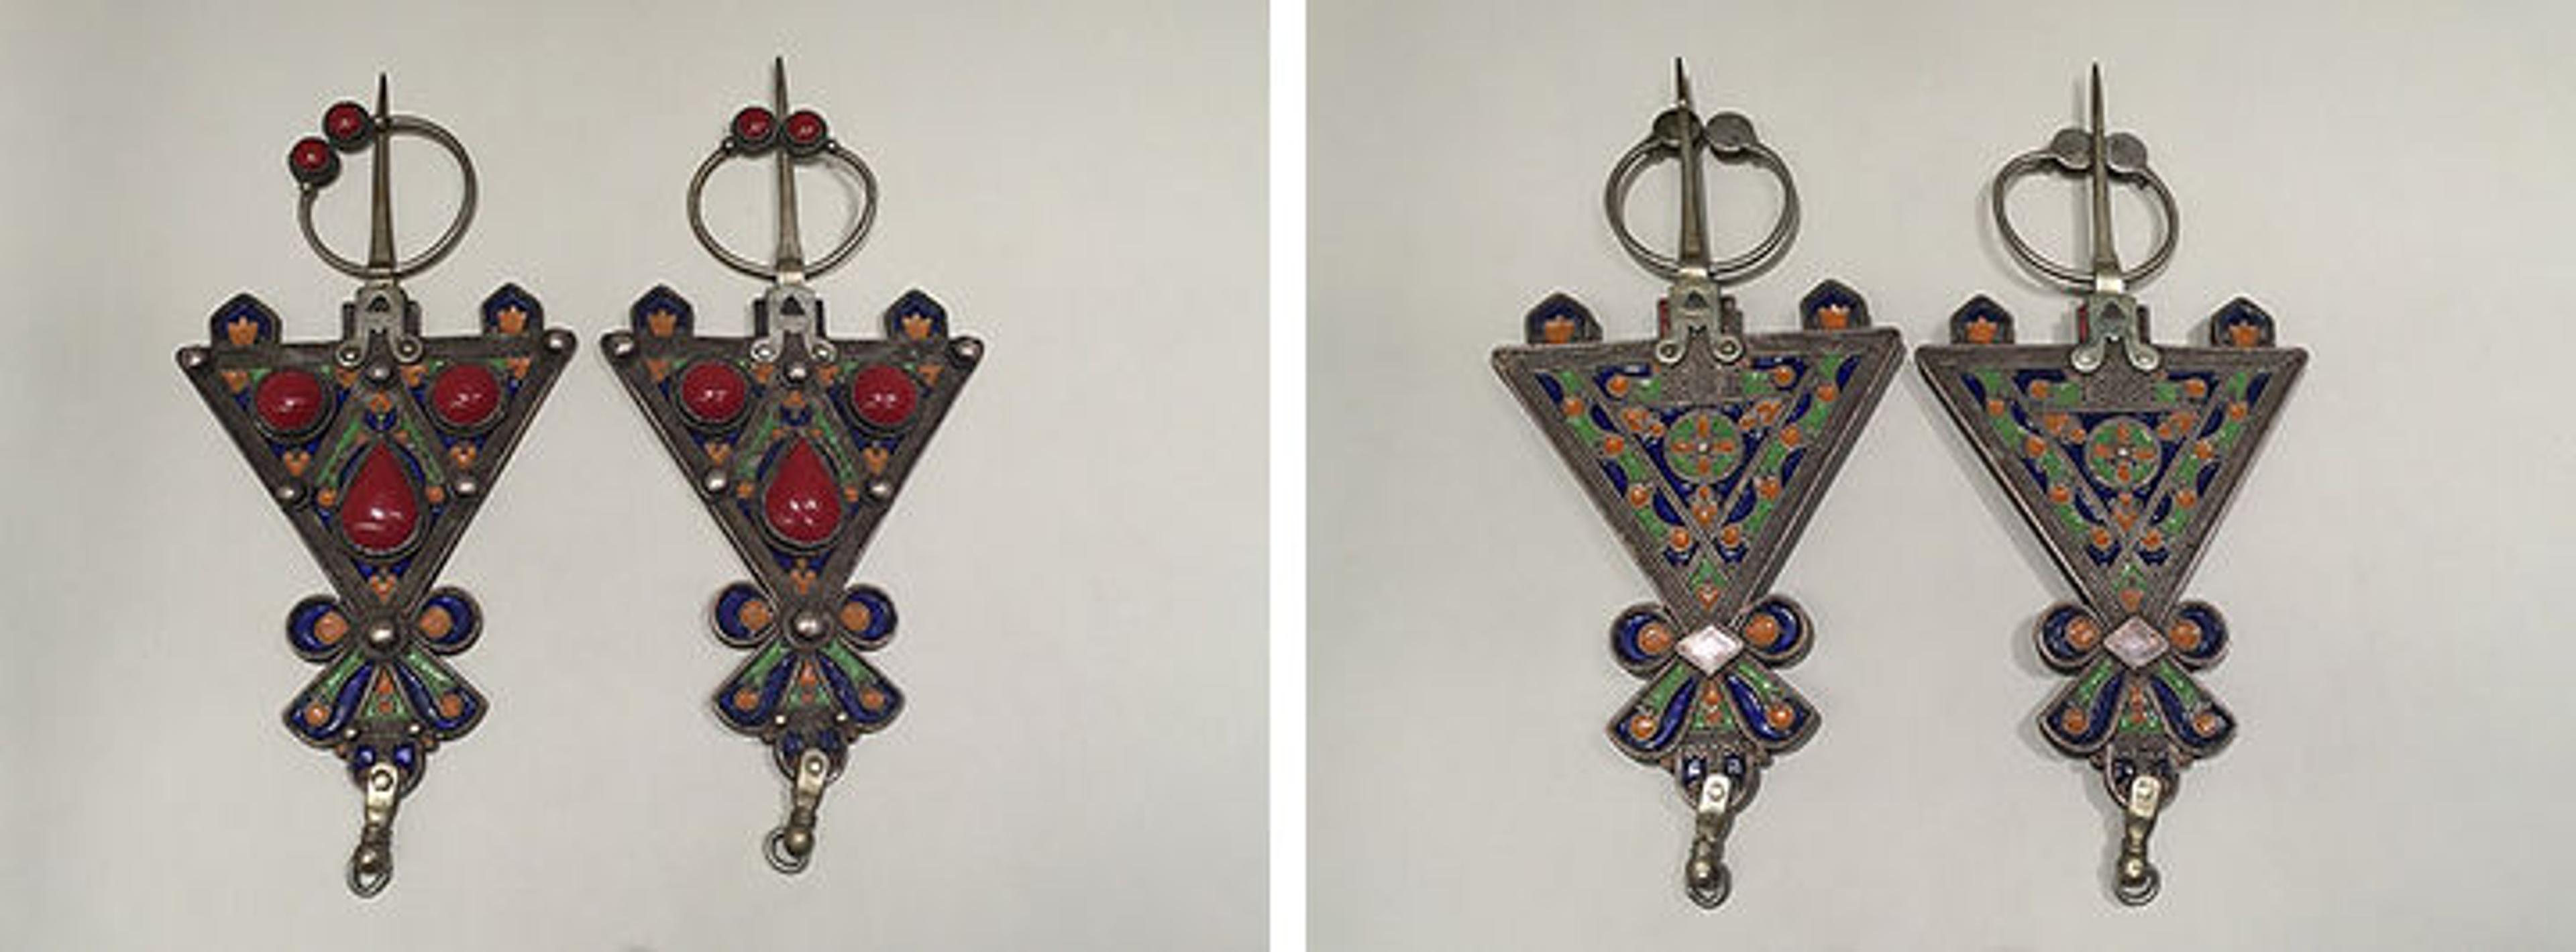 Left: Silver fibulae inset with imitation coral. Right: The back of the same fibulae